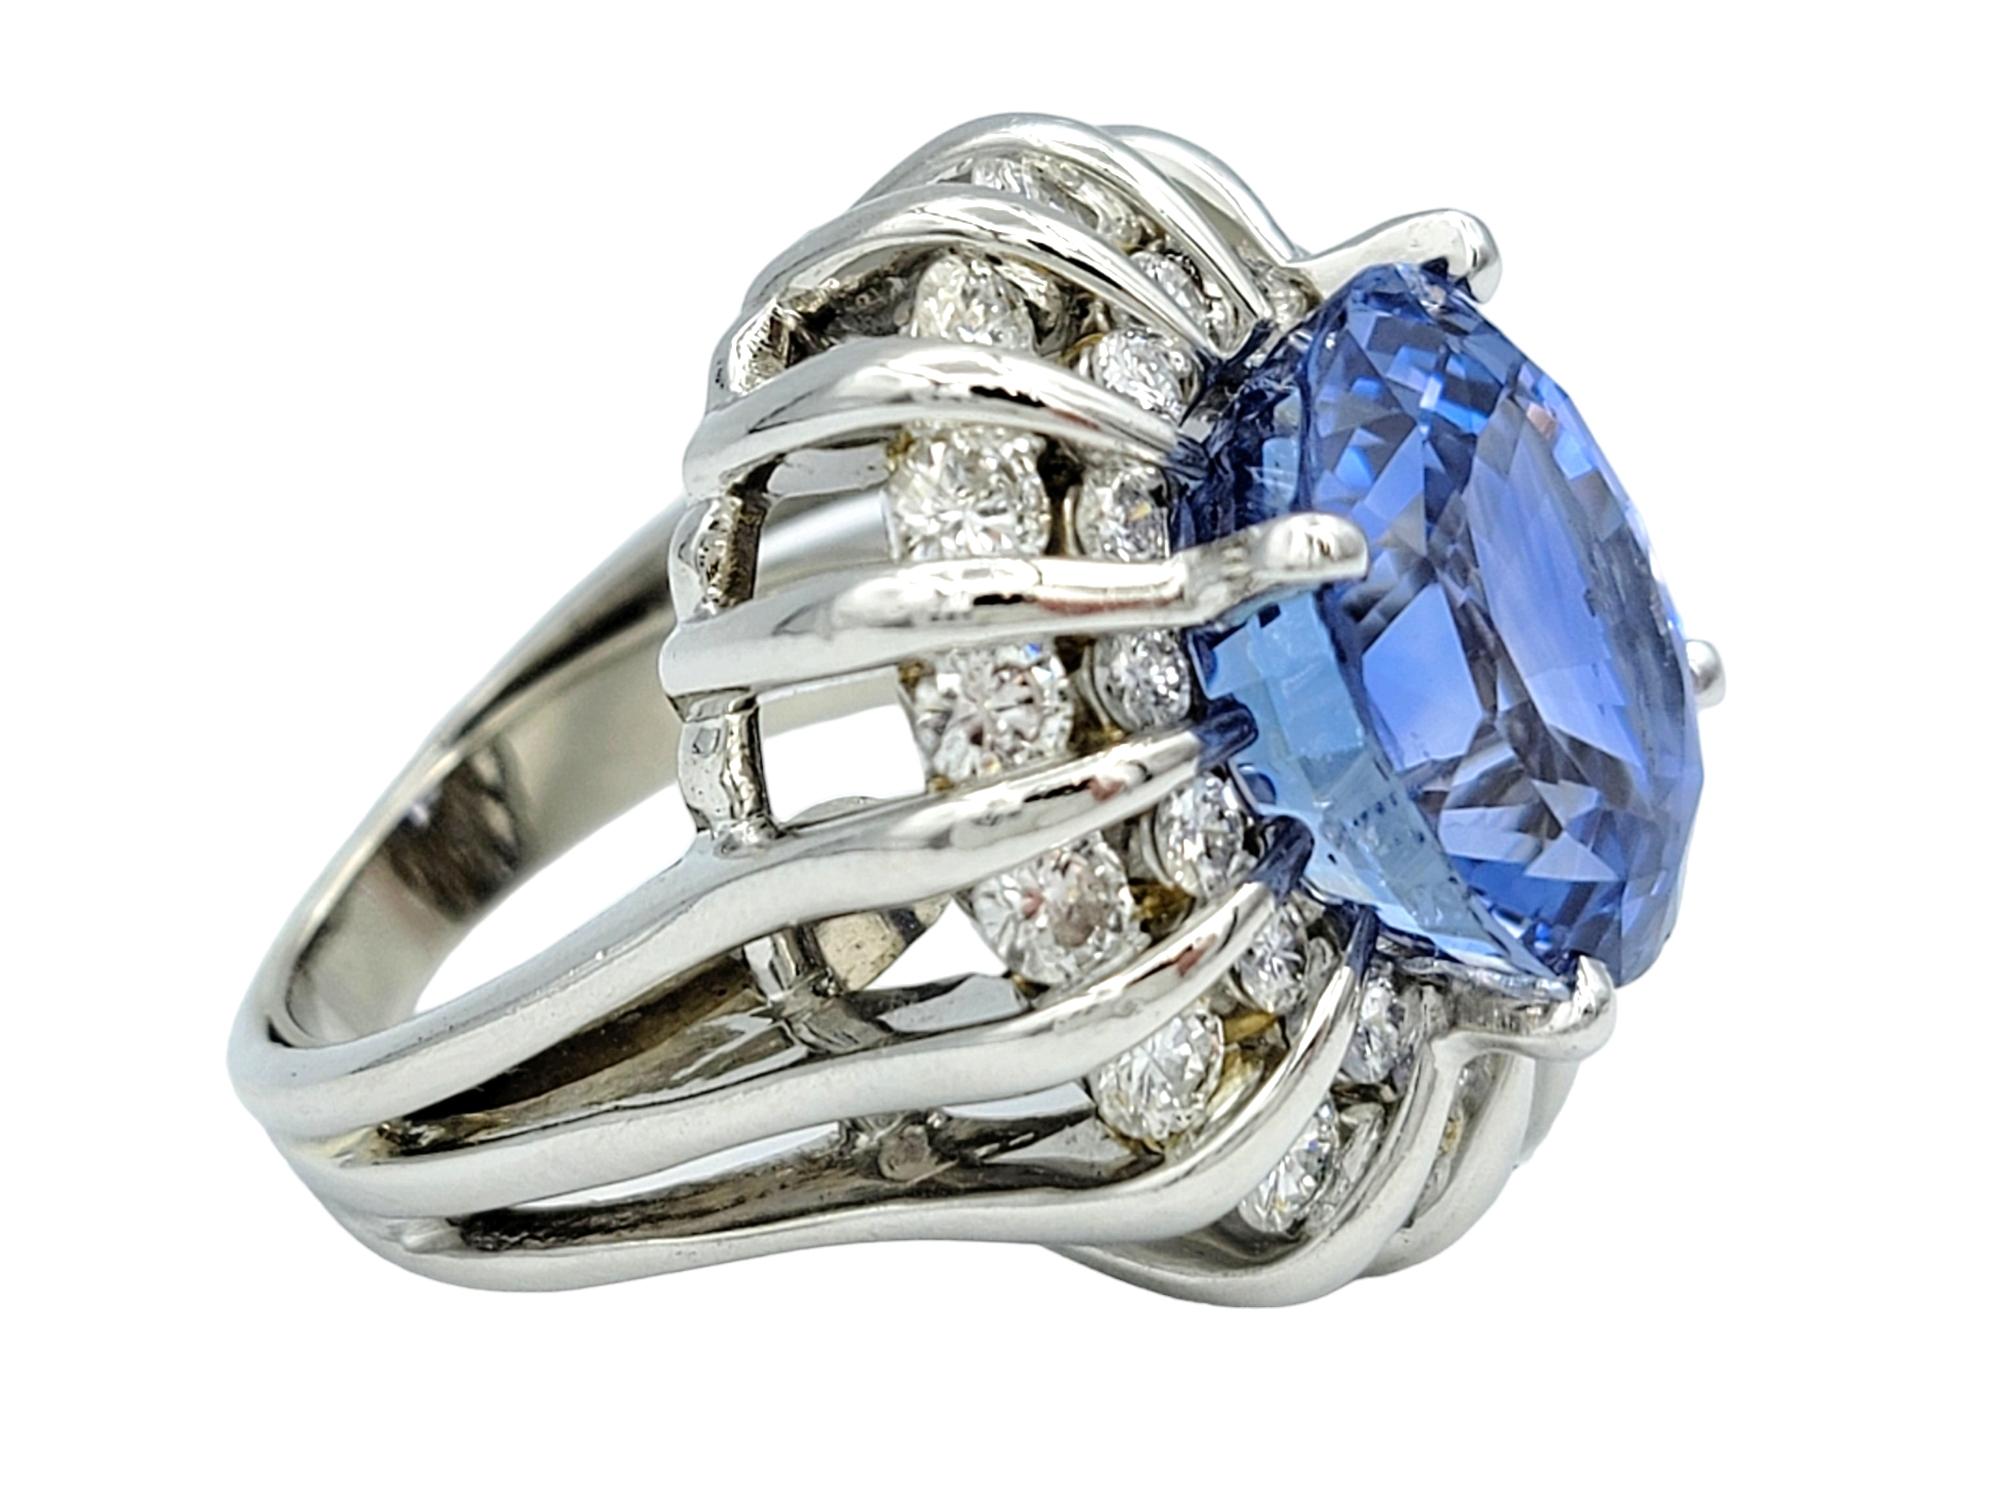 Rare Untreated 16.27 Carat Oval Cut Ceylon Sapphire and Double Diamond Halo Ring For Sale 1